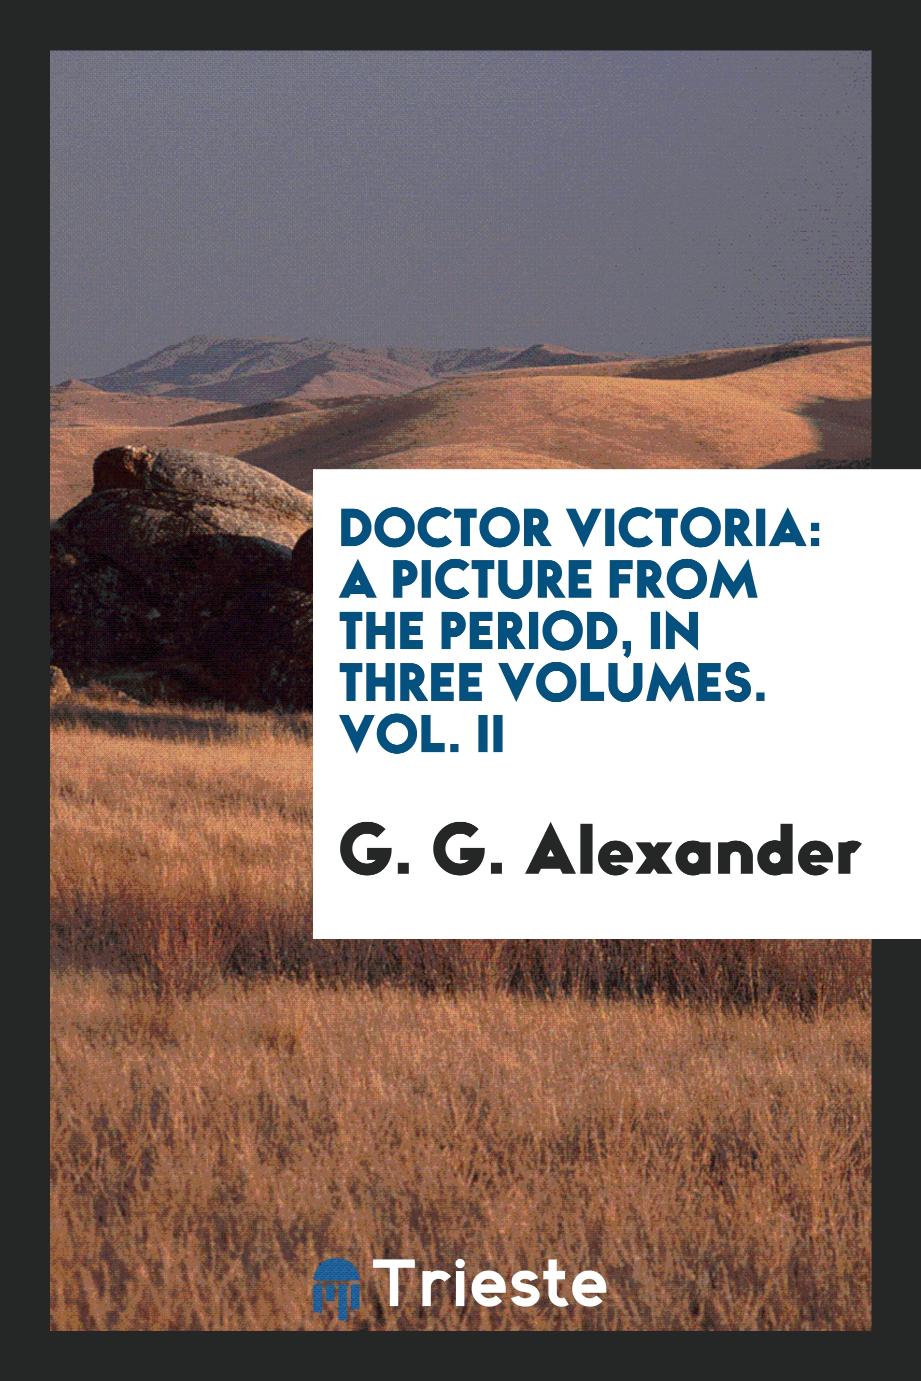 Doctor Victoria: a picture from the period, in three volumes. Vol. II